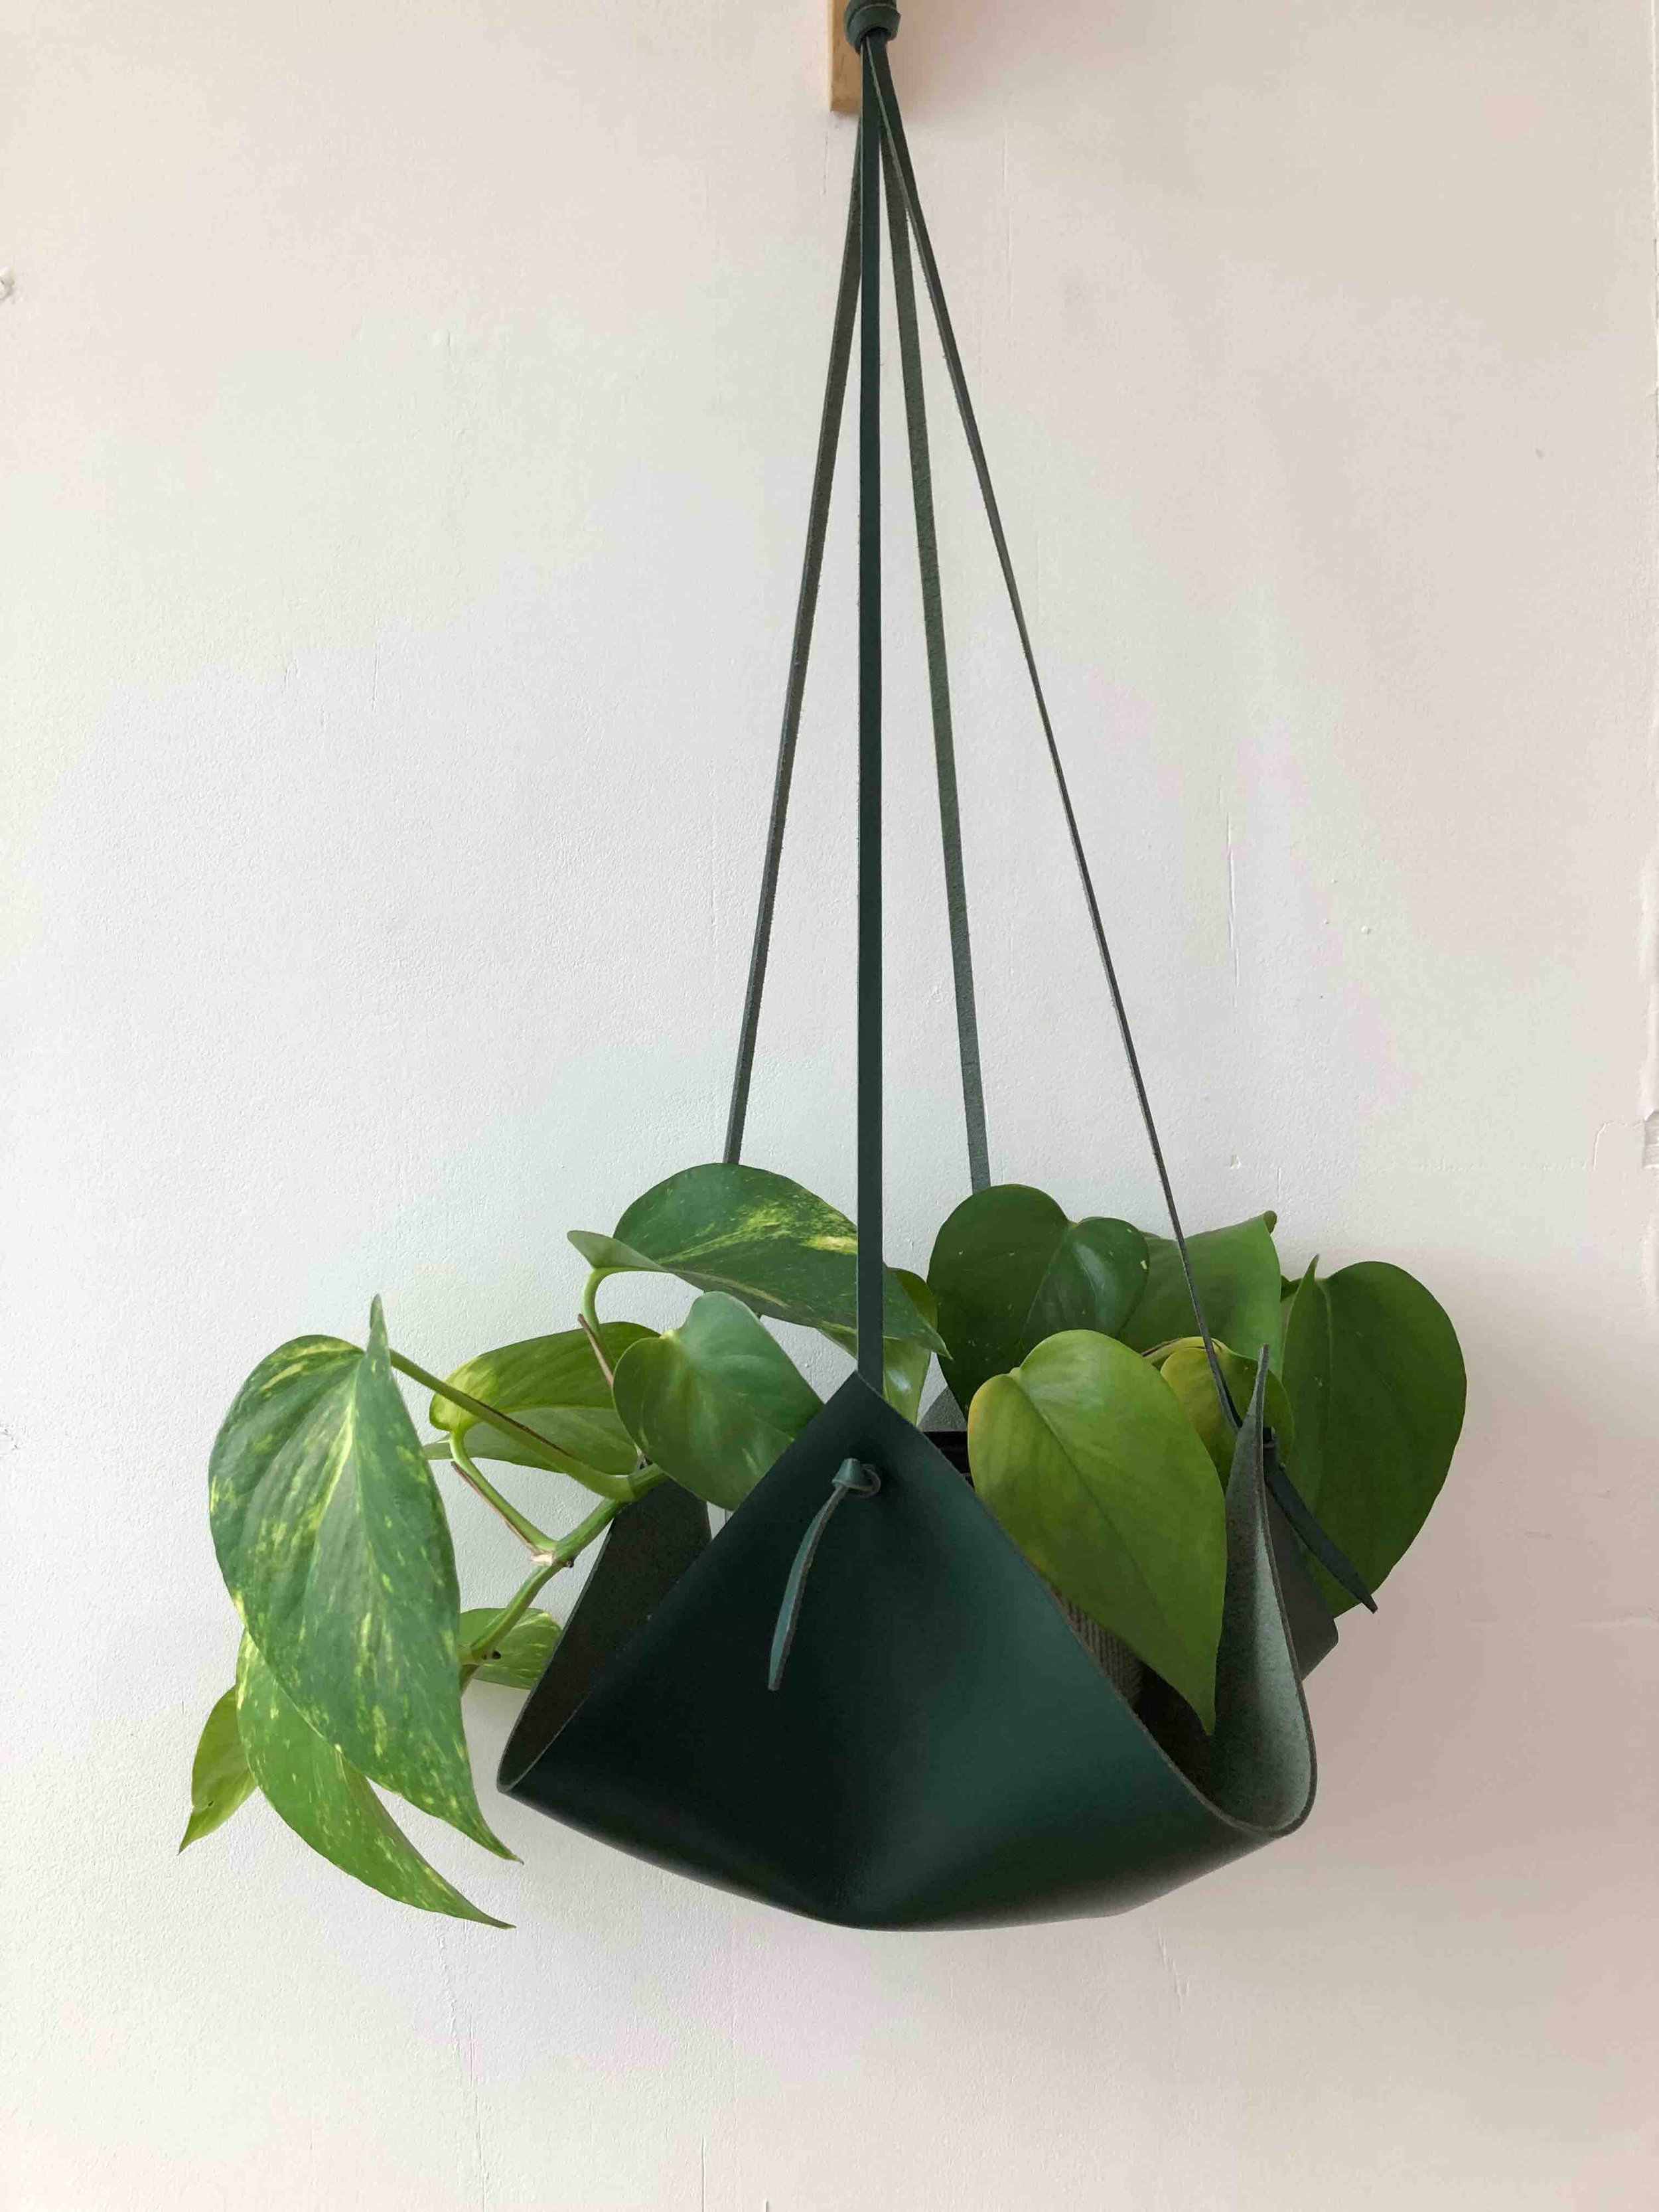 CARV sustainable leather plant hanger handmade in the UK.